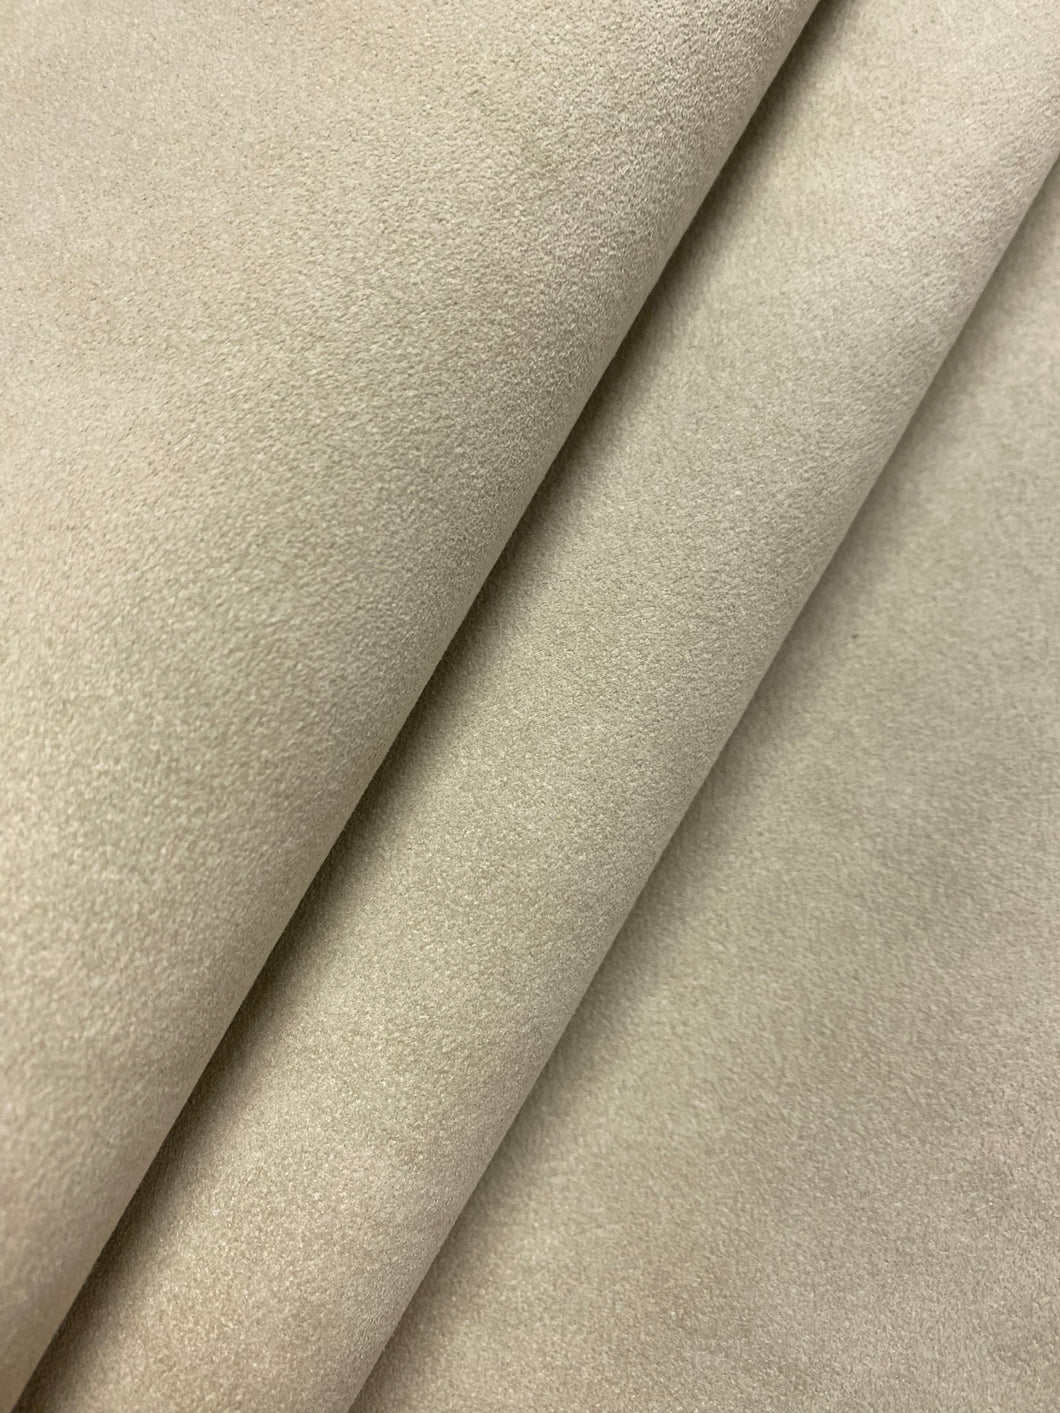 Designer Faux Hide Leather Taupe Suede Water & Stain Resistant Upholstery Fabric WHS 4516